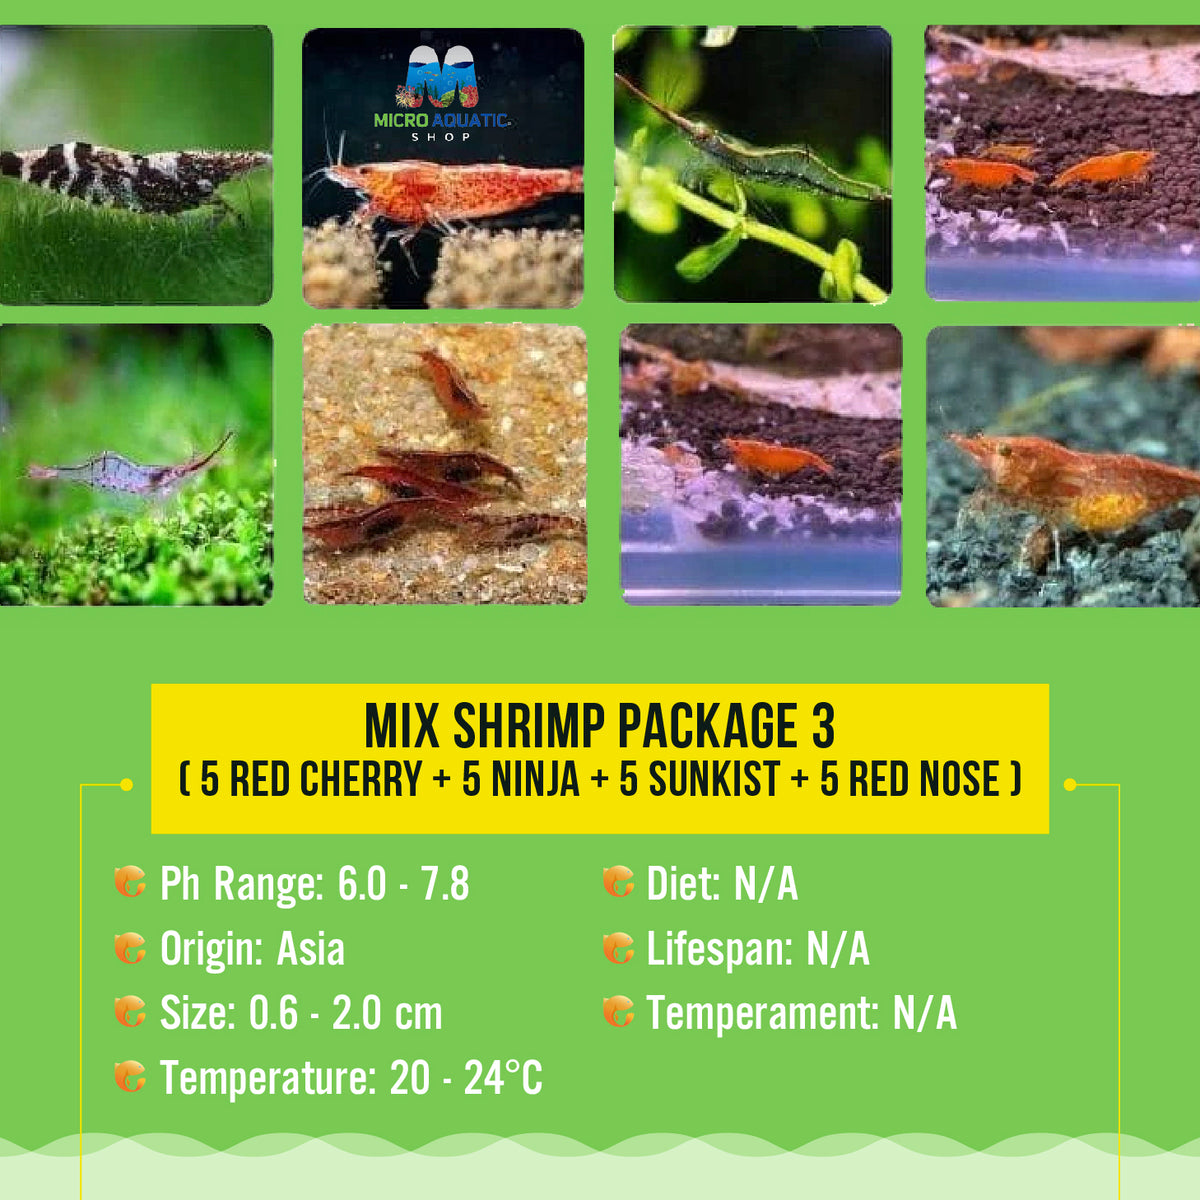 Mix Shrimp Package 3 ( 5 red cherry + 5 ninja + 5 sunkist + 5 red nose )